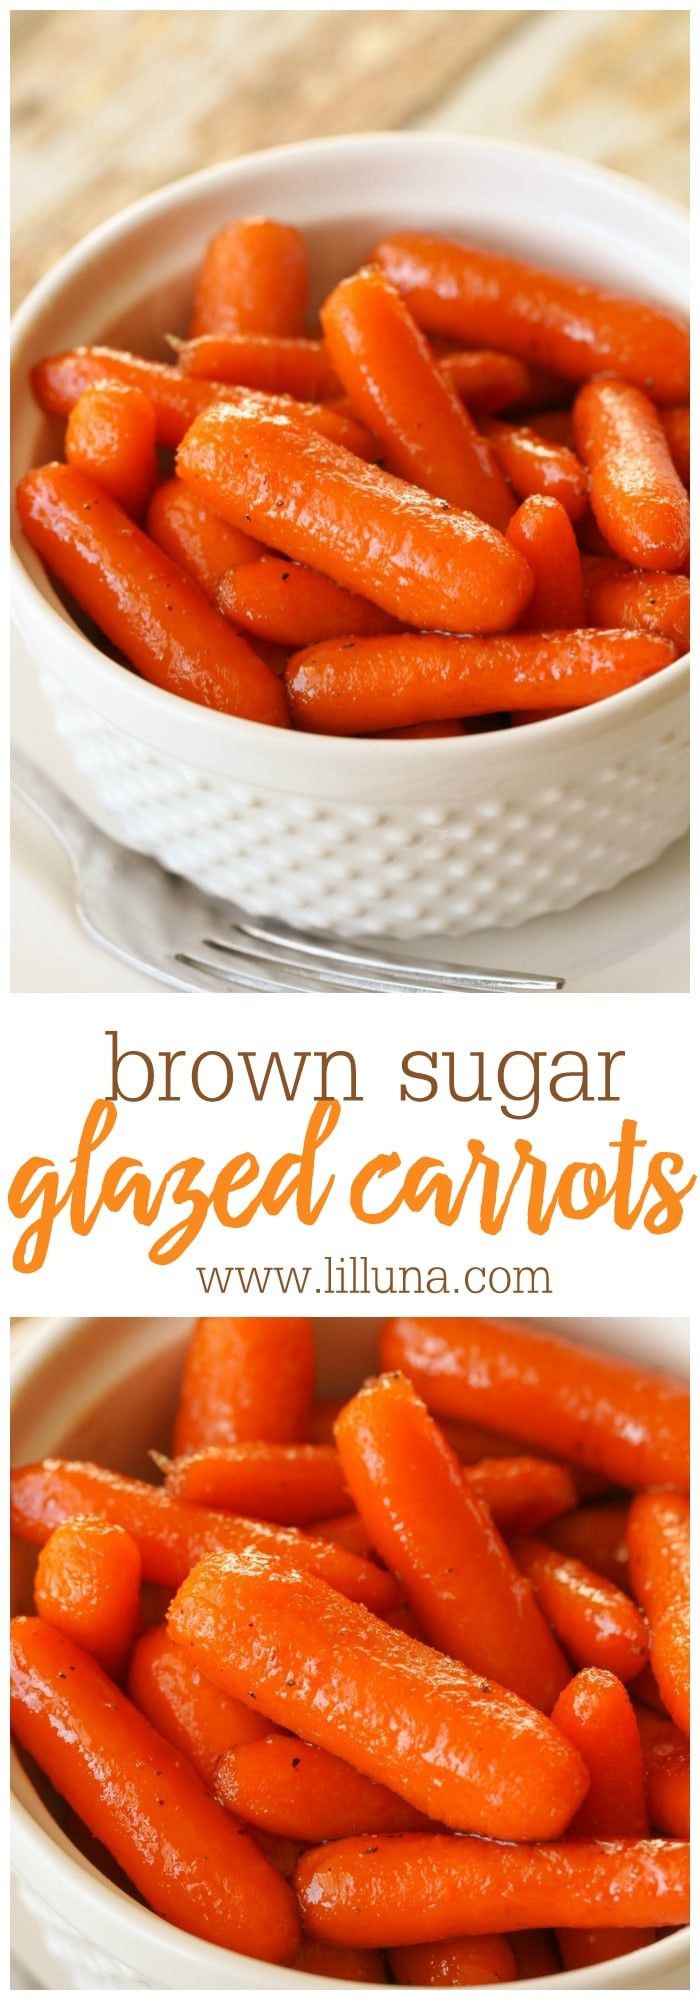 Baby Food Carrots Recipe
 Brown Sugar Glazed Carrots Recipe the Perfect Side Dish